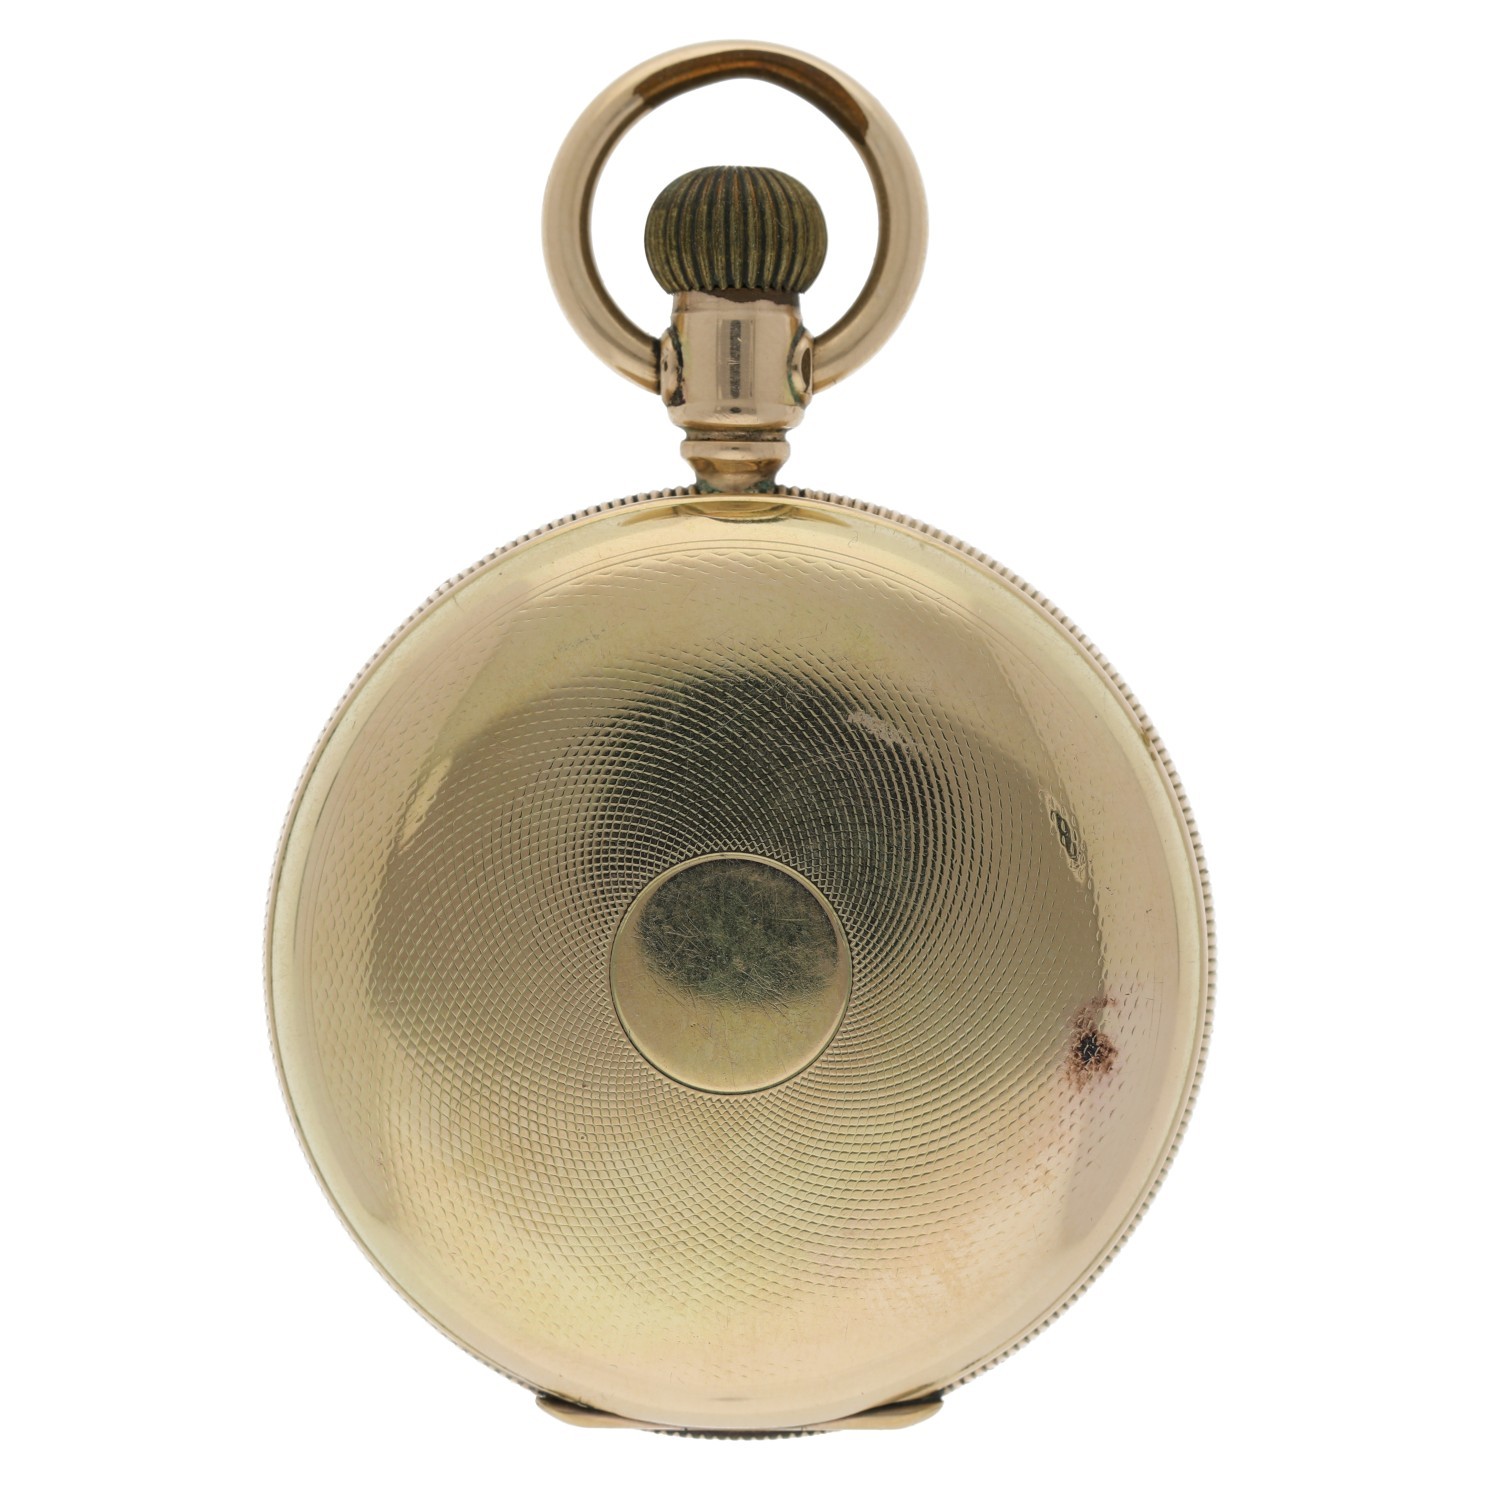 Elgin National Watch Co. centre seconds gold plated lever set hunter pocket watch, circa 1881, - Image 4 of 5